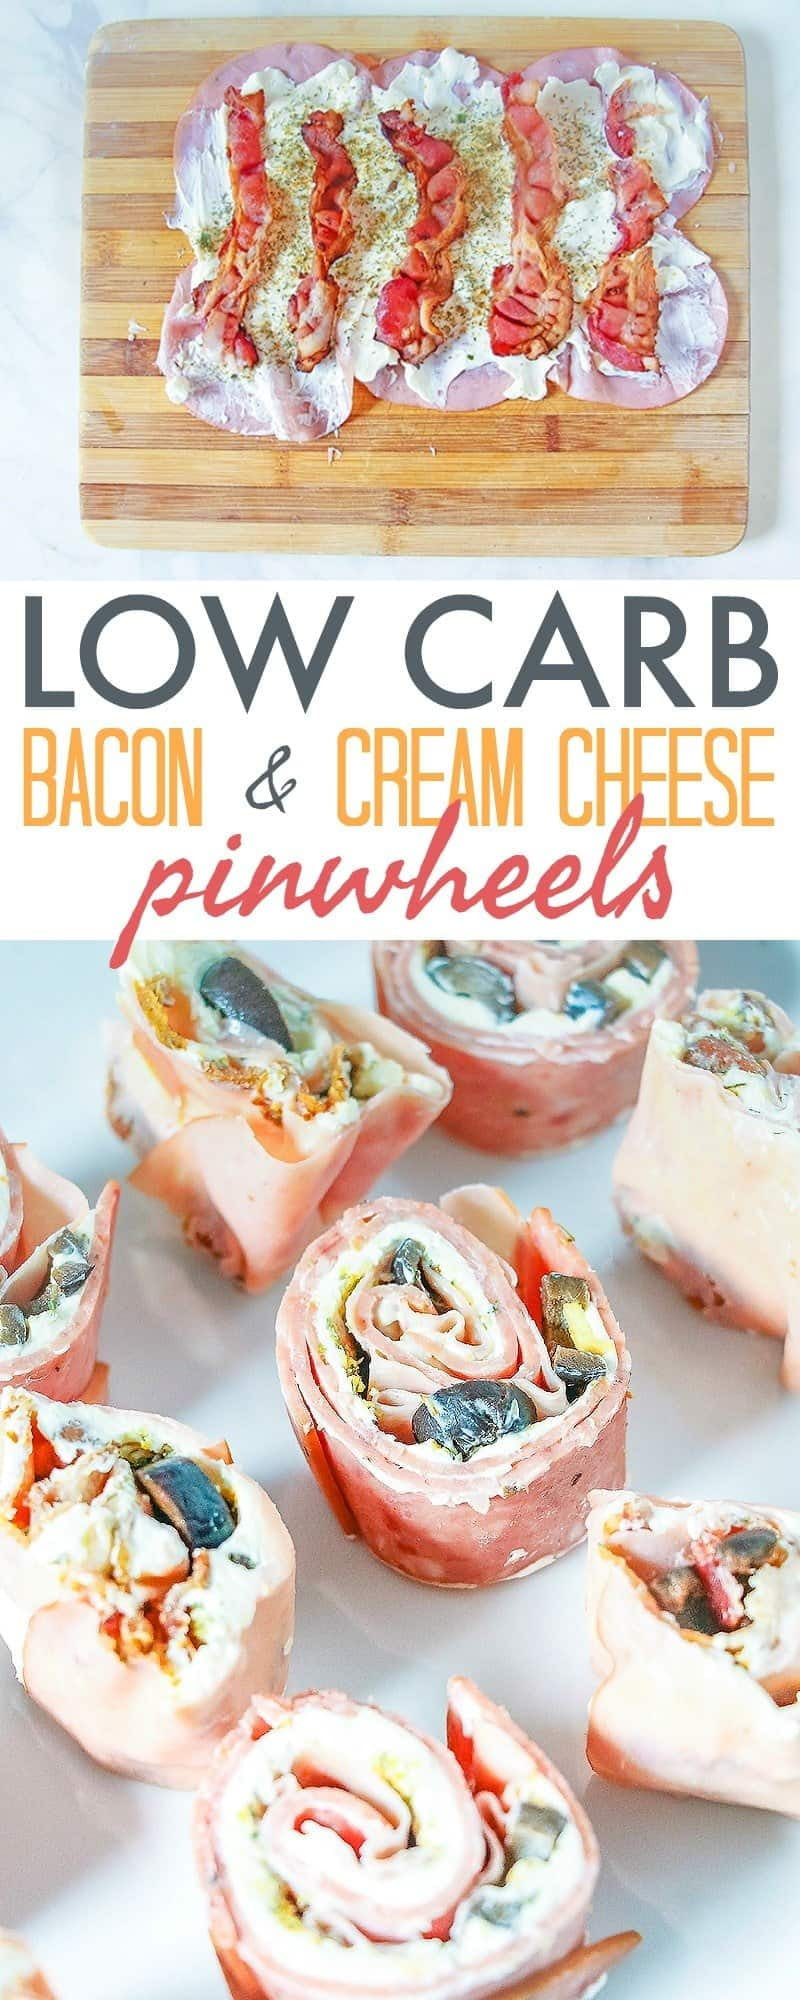 Low Carb Cream Cheese Recipes
 Low Carb Pinwheels with Bacon and Cream Cheese 730 Sage